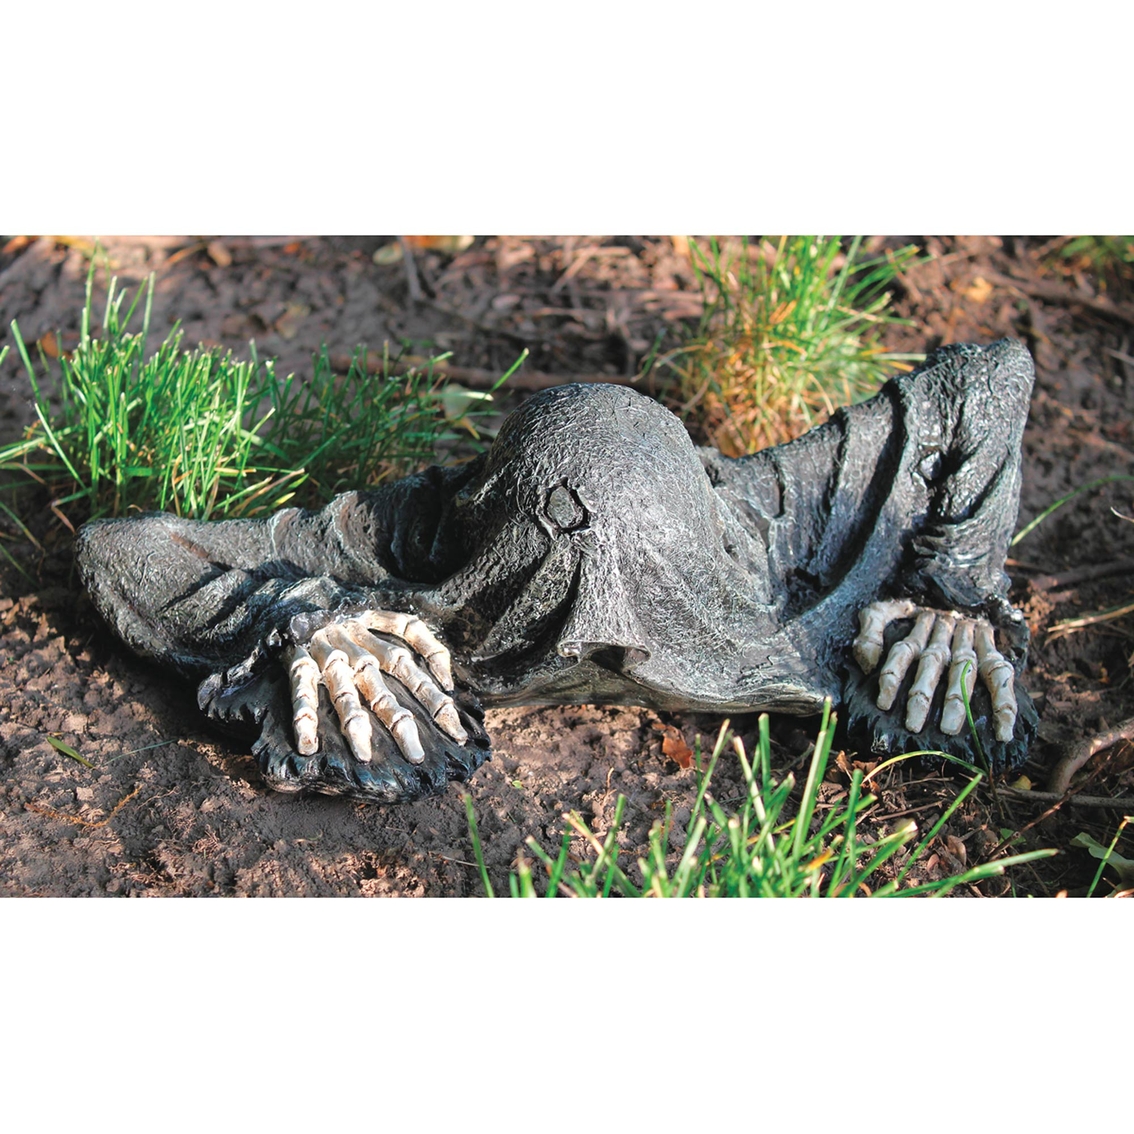 Design Toscano Creeper from Grave Statue - Image 2 of 2